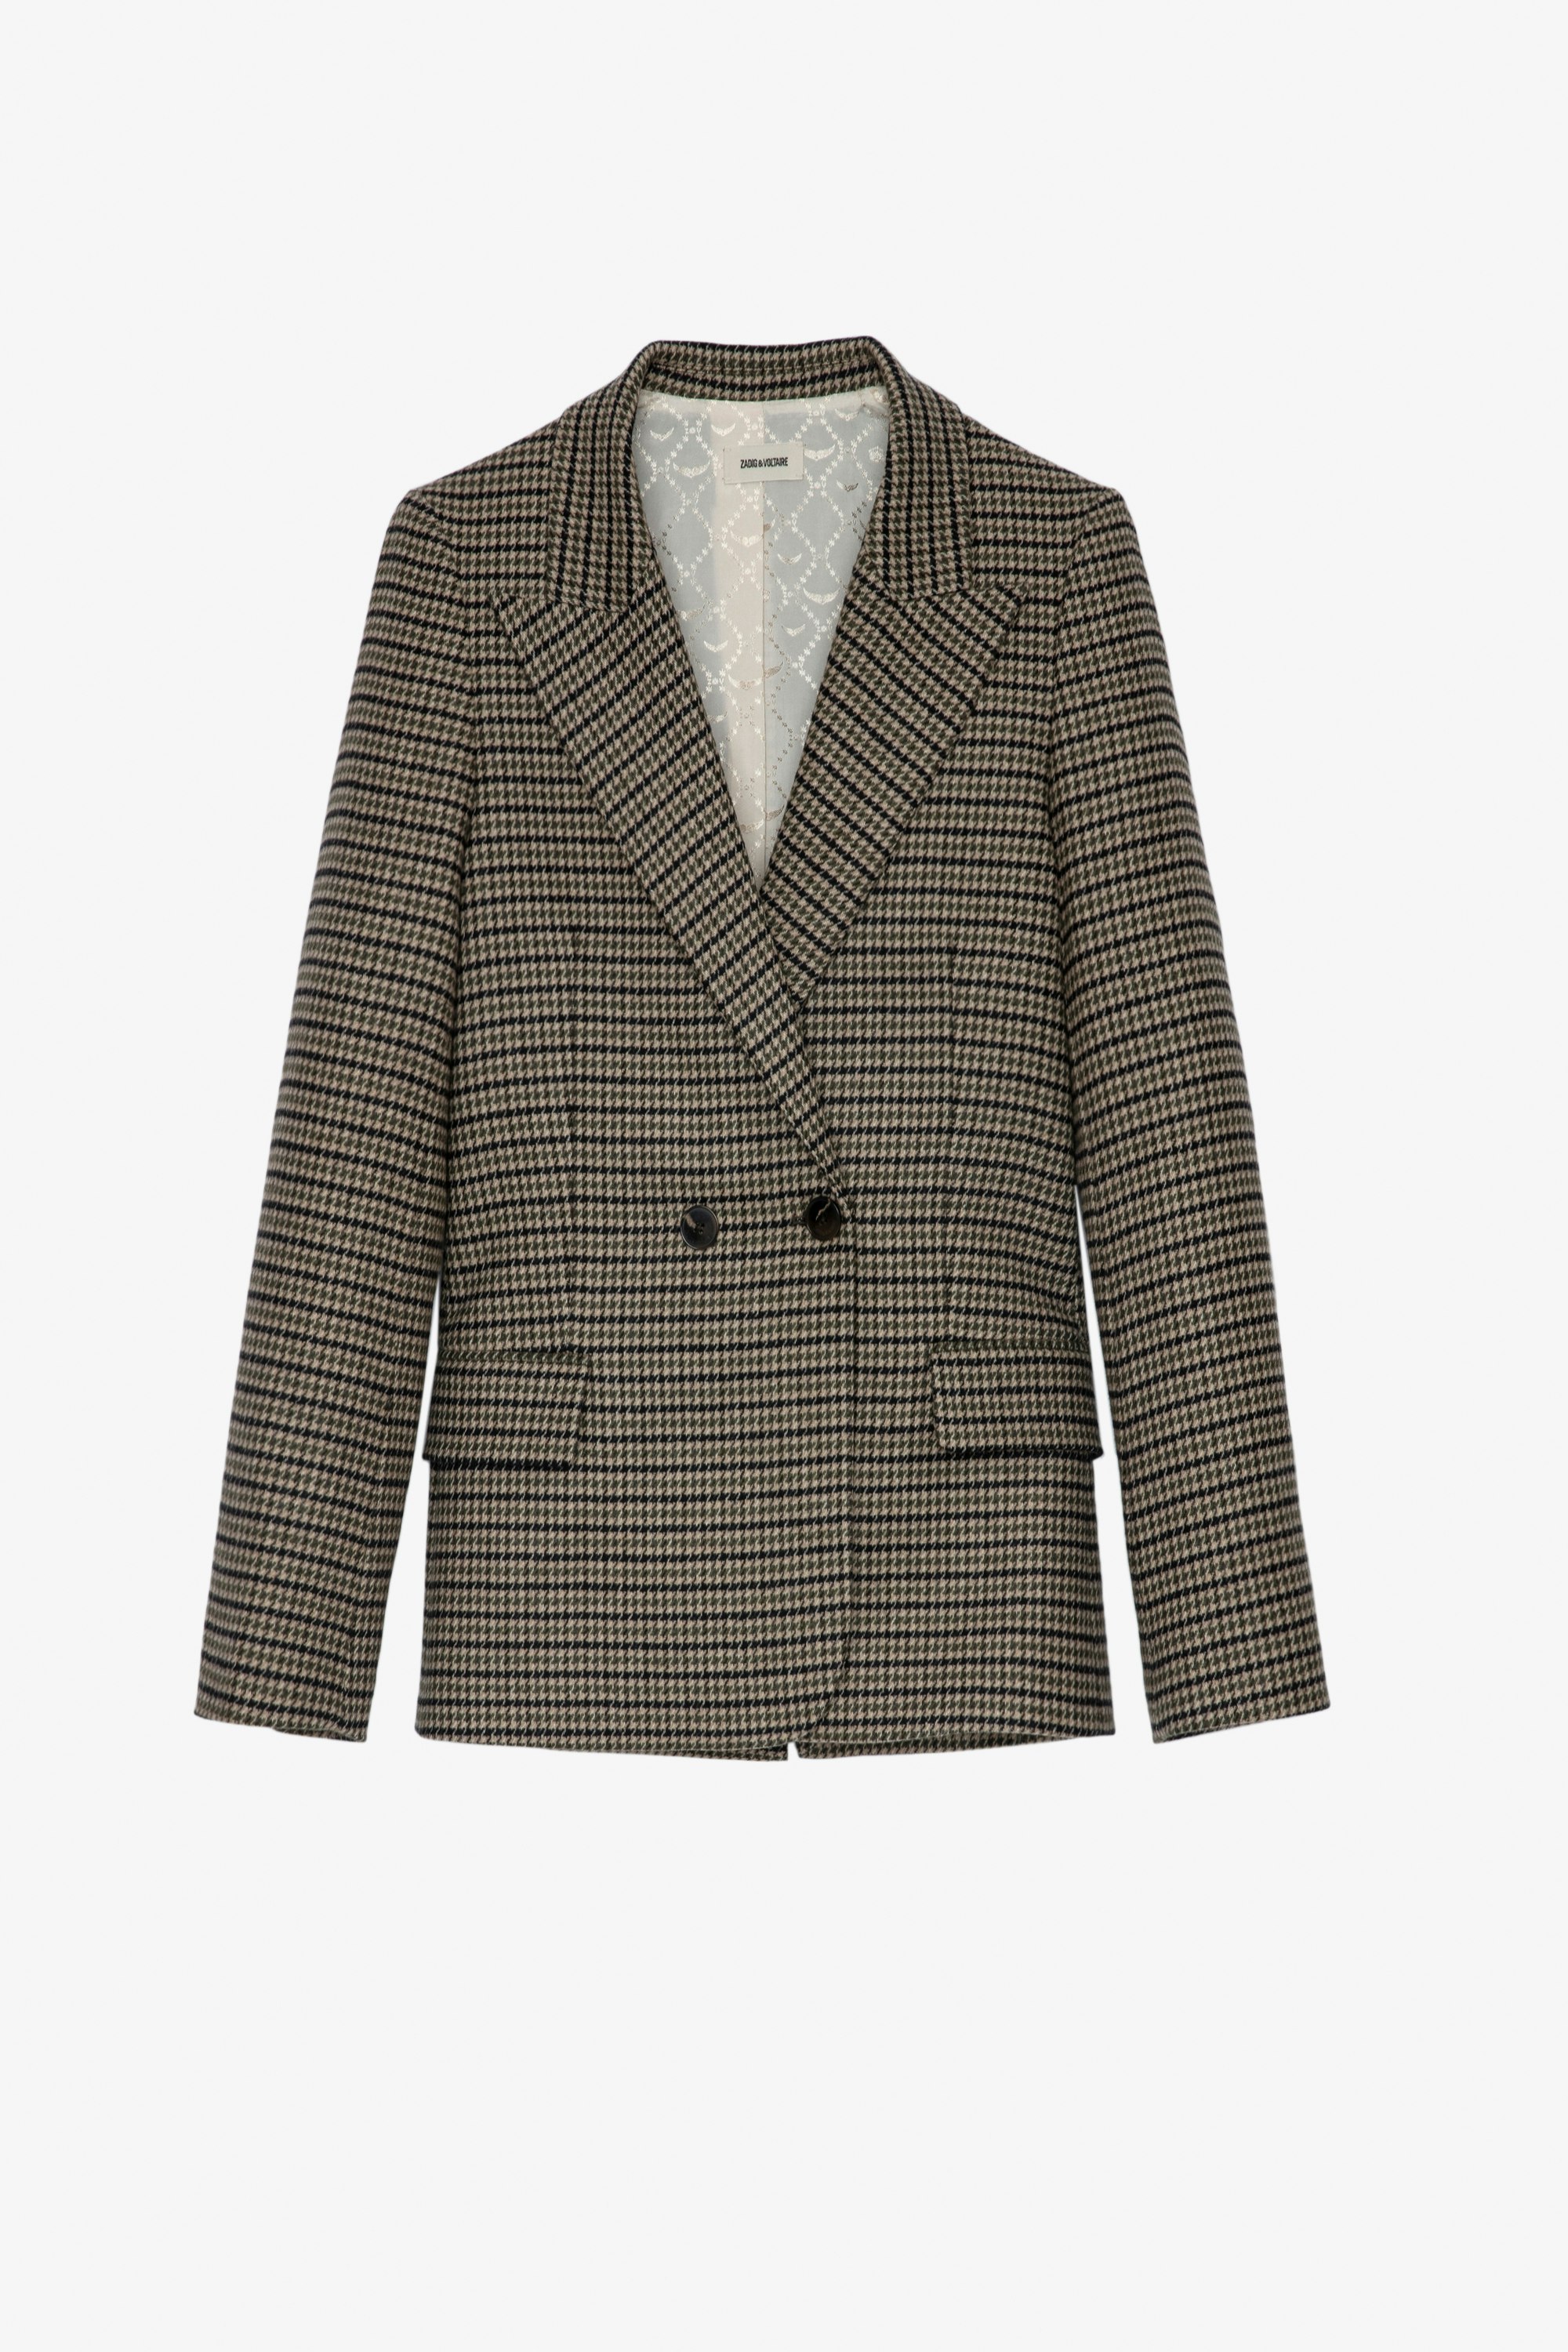 Visit Blazer Women’s khaki tailored jacket in houndstooth check with star patches on the elbows